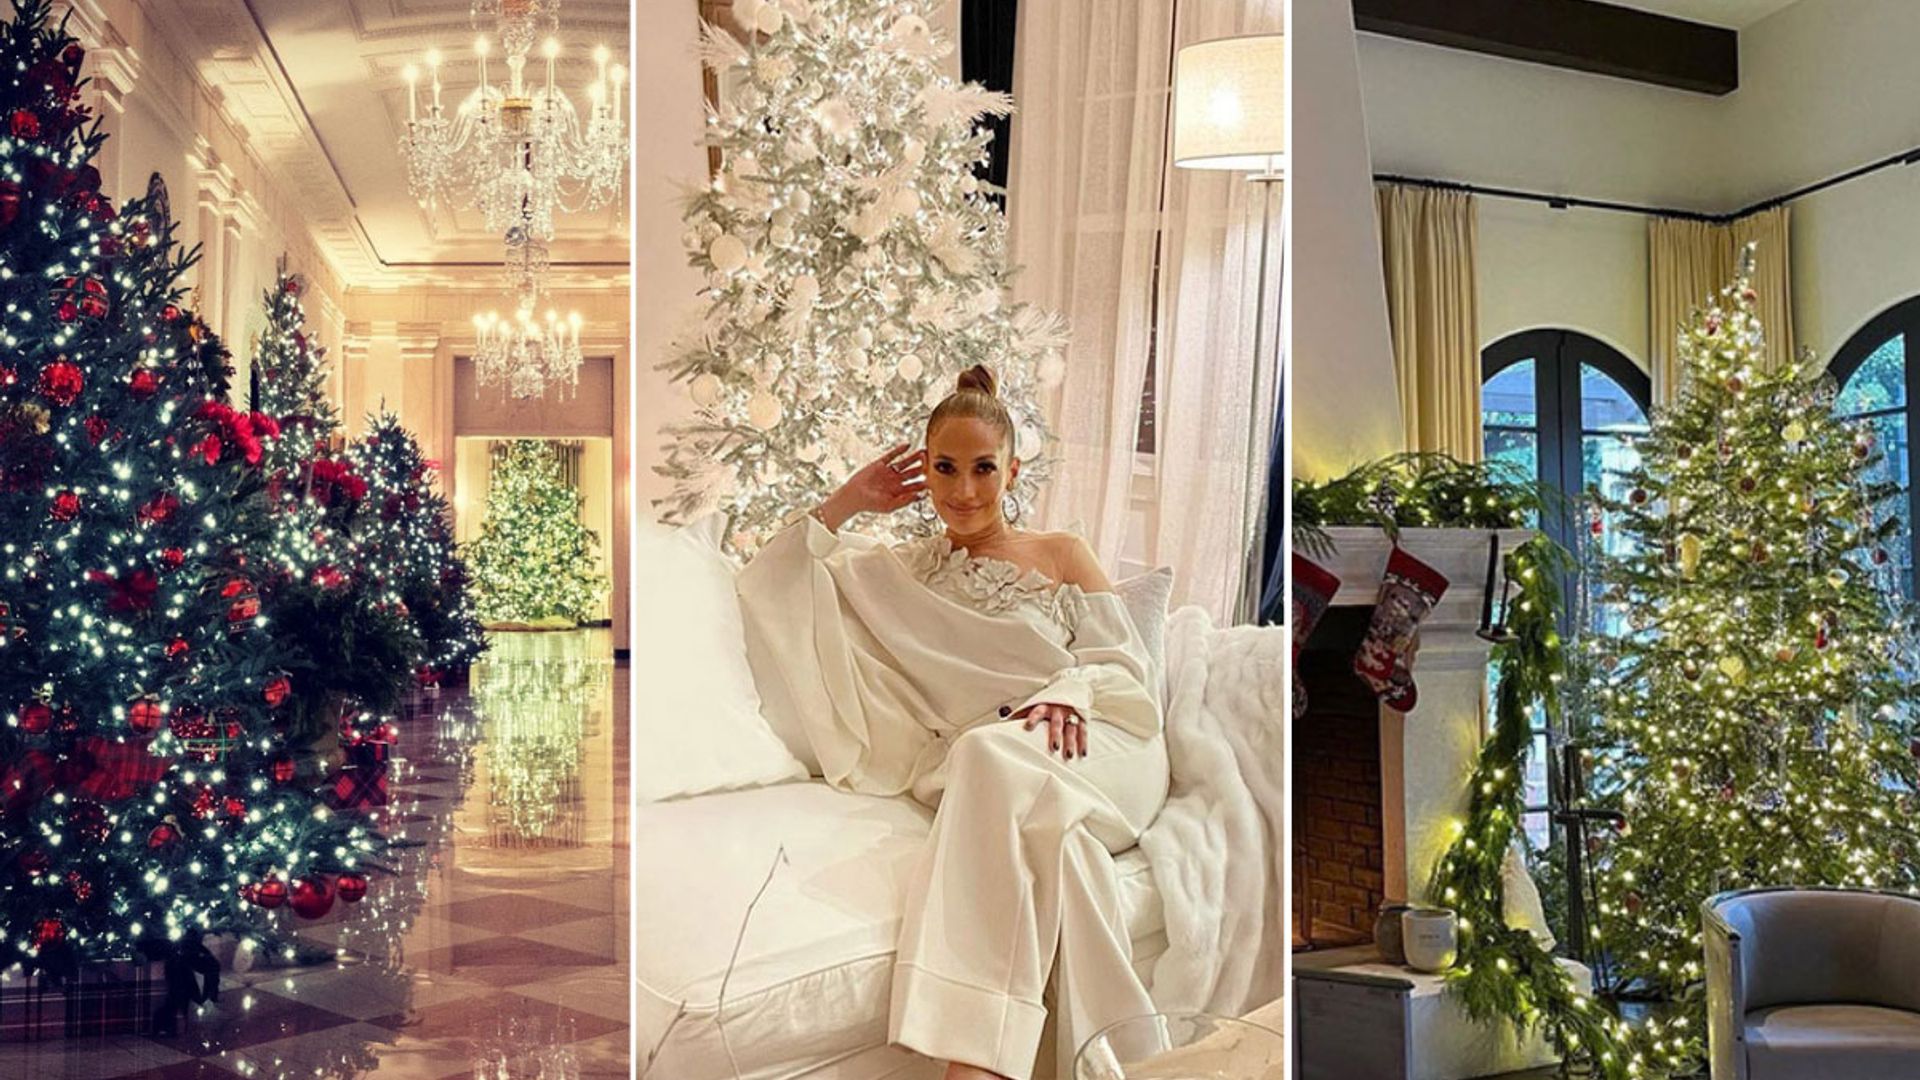 You won't believe these US celebrity Christmas decorations – see photos